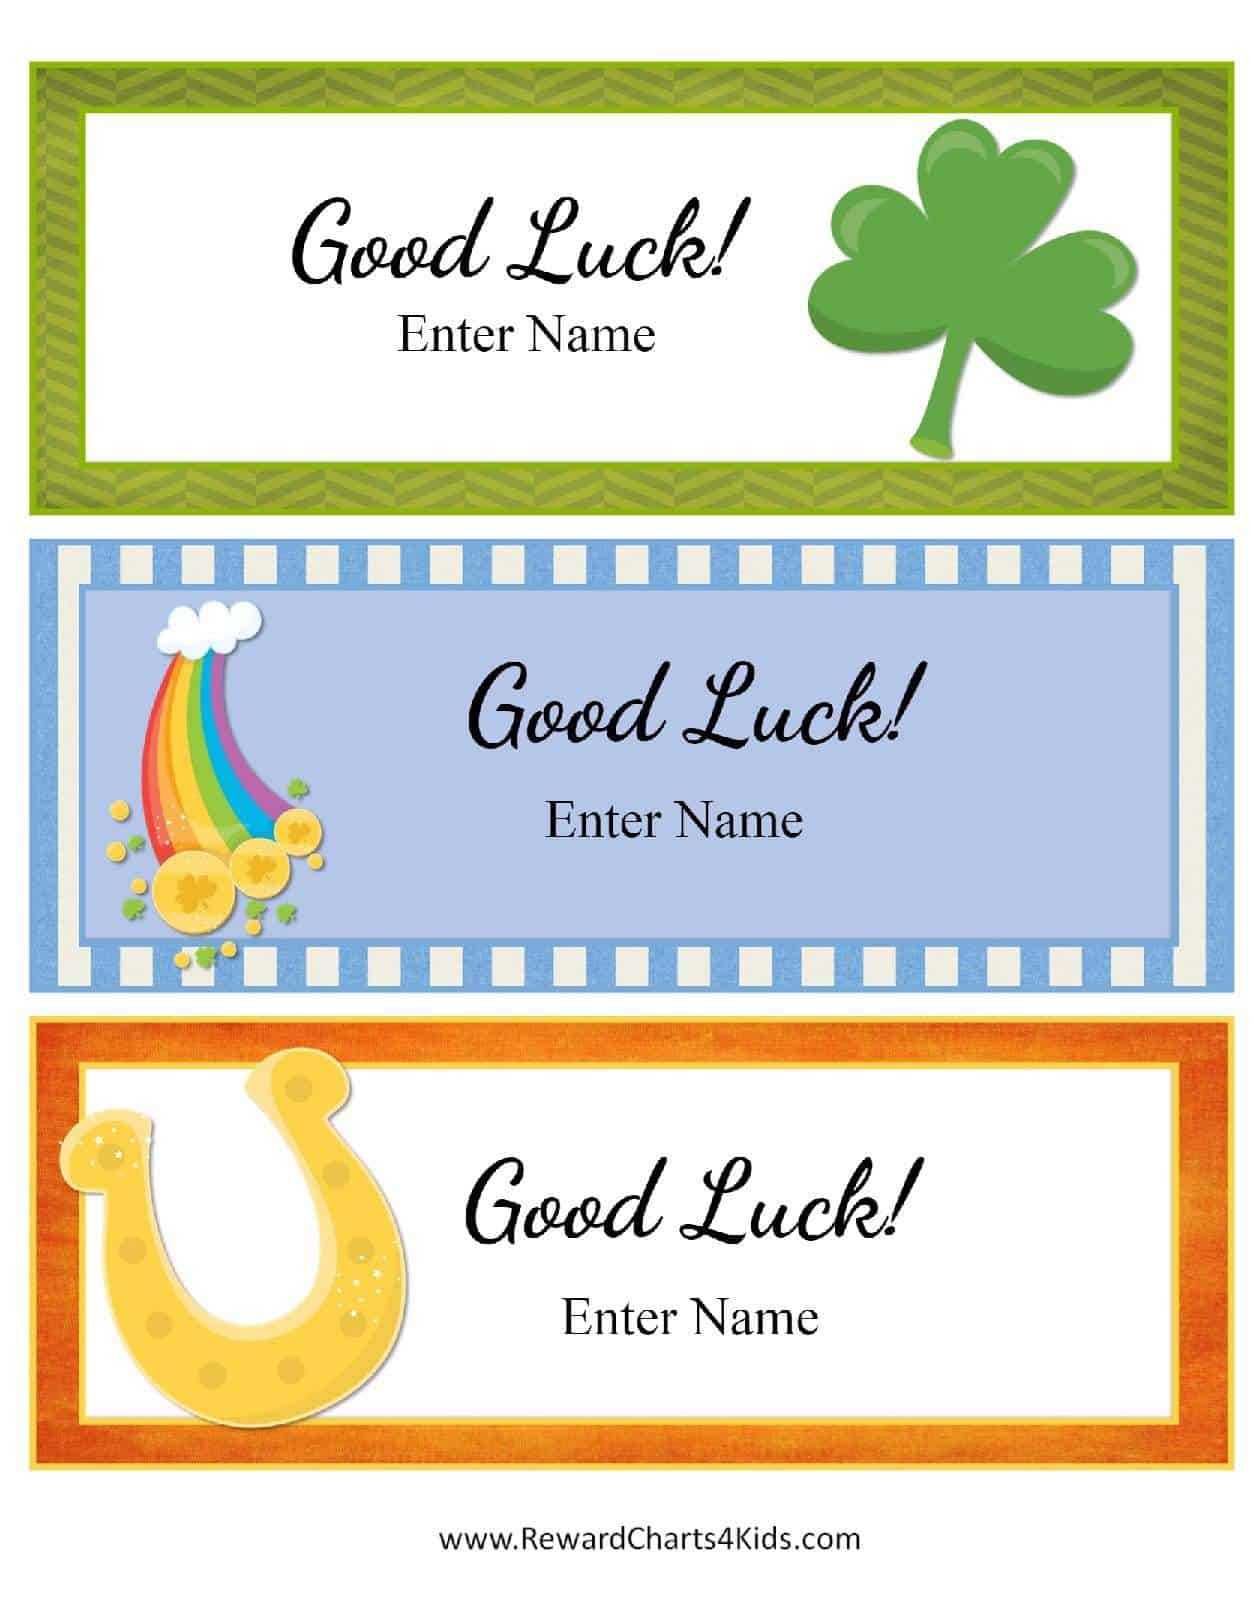 Free Good Luck Cards For Kids | Customize Online & Print At Home Pertaining To Good Luck Card Templates